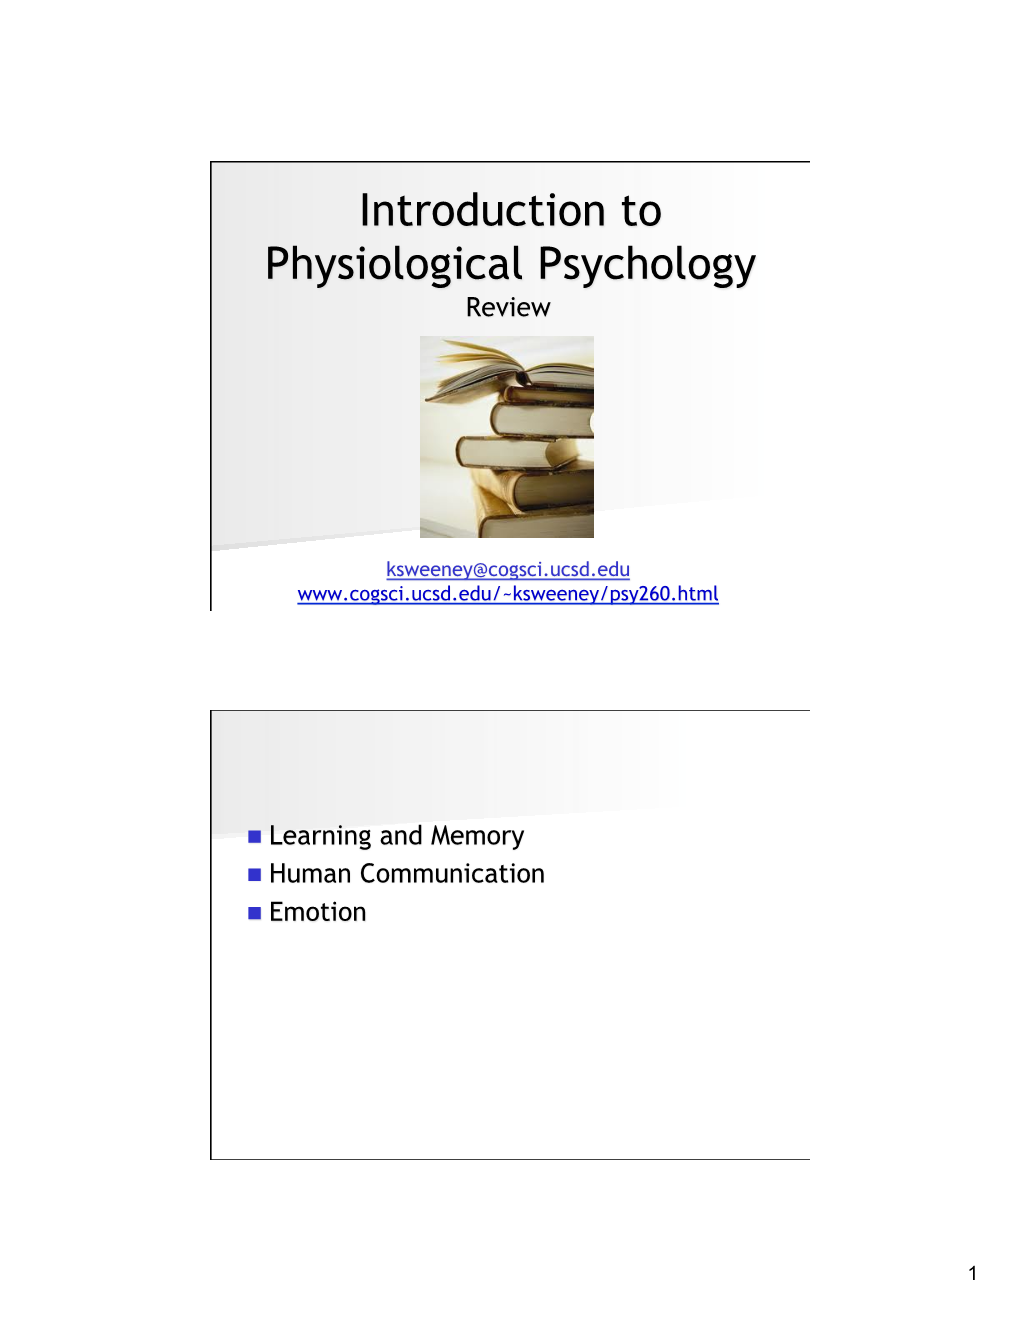 Introduction to Physiological Psychology Review